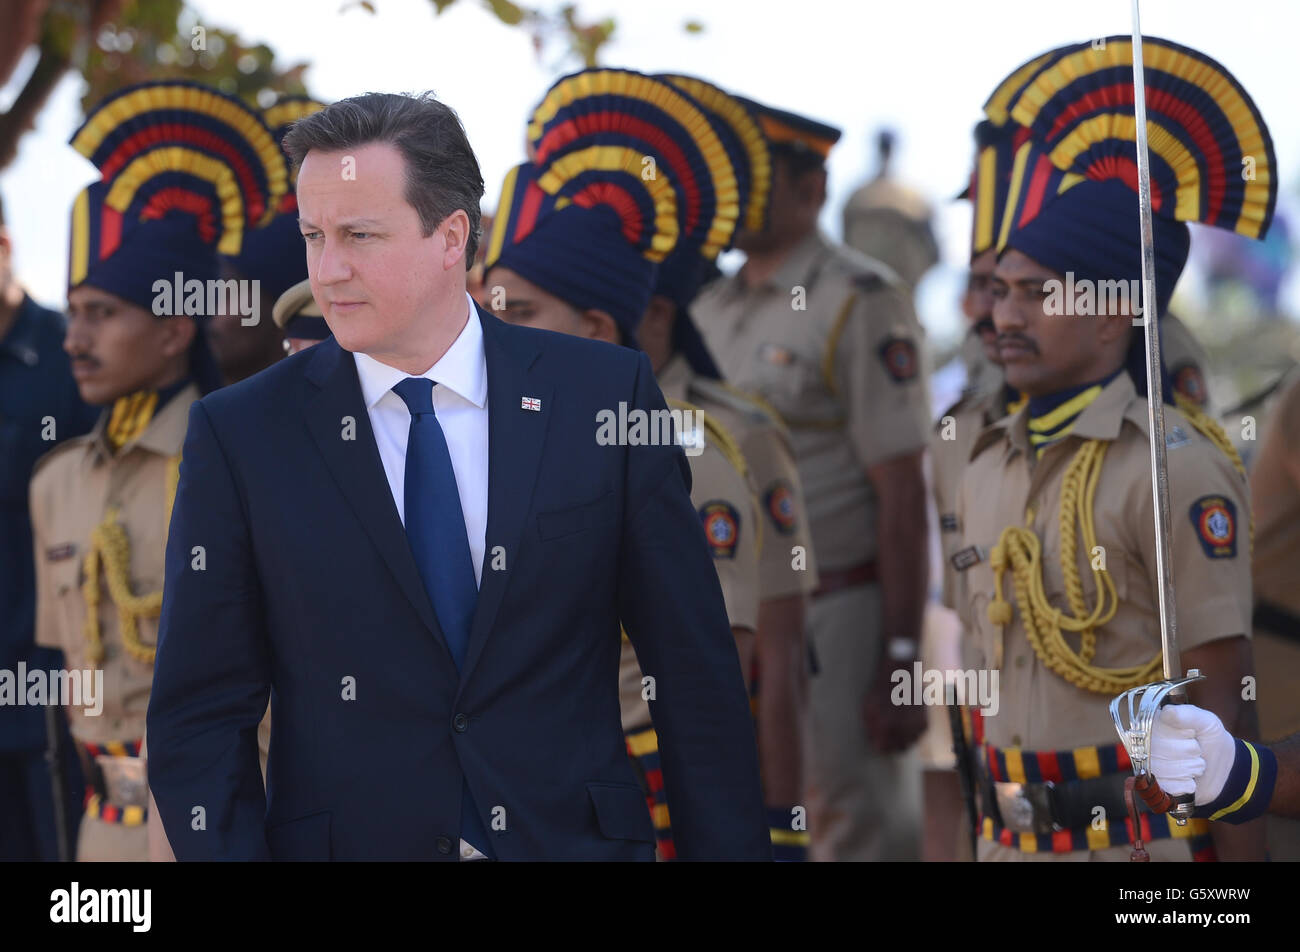 Prime Minister David Cameron arrives to lay a wreath at the memorial to commemorate the policemen who were killed in the terrorist attacks of November 2008, in Mumbai, India. Stock Photo